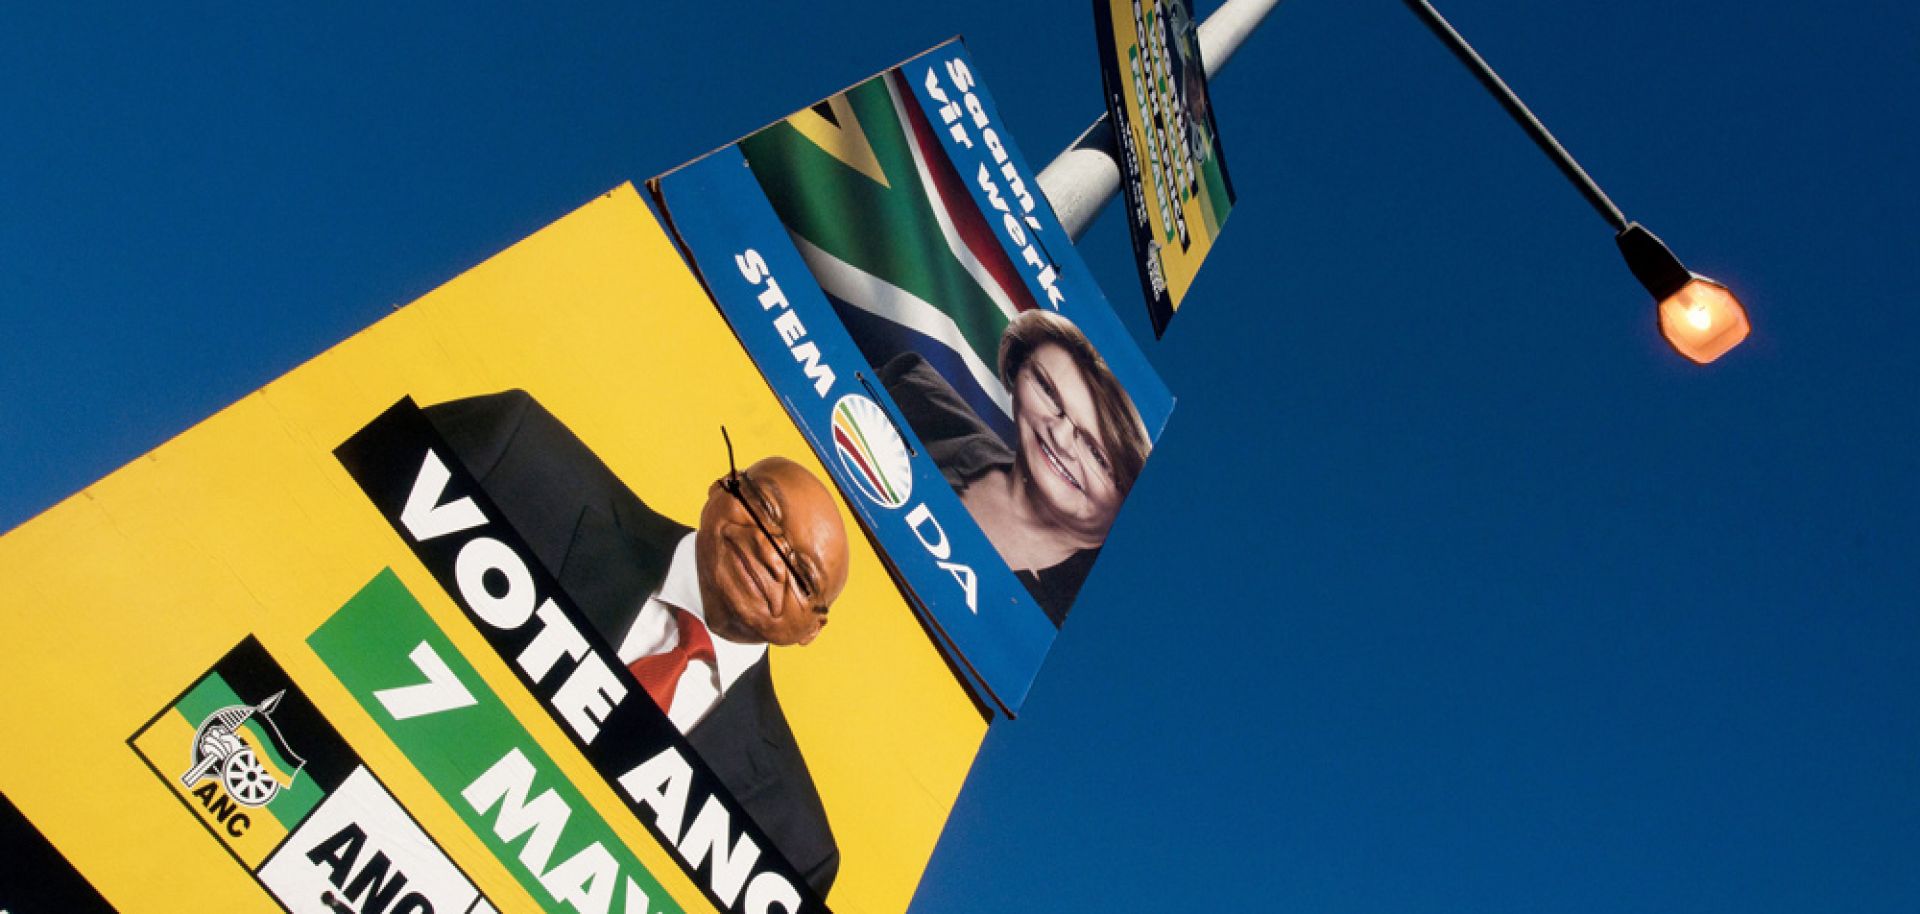 Election posters with the faces of Jacob Zuma (in yellow), African National Congress and South African president, and Helen Zille (in blue), opposition Democratic Alliance are displayed on May 2.